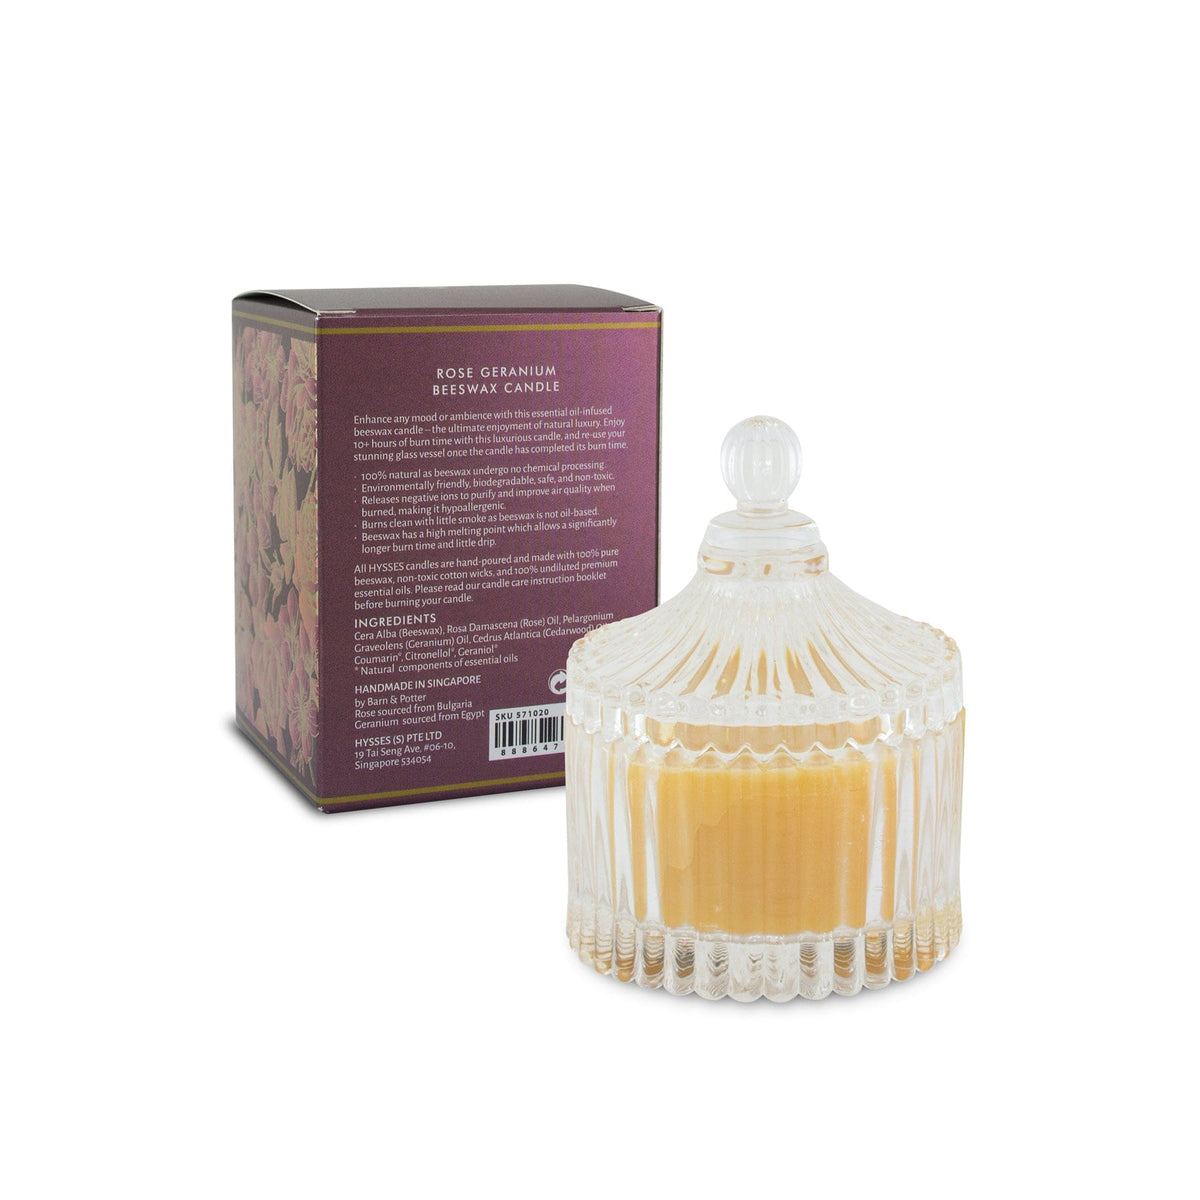 Hysses Home Scents 200g Beeswax Candle Rose Geranium